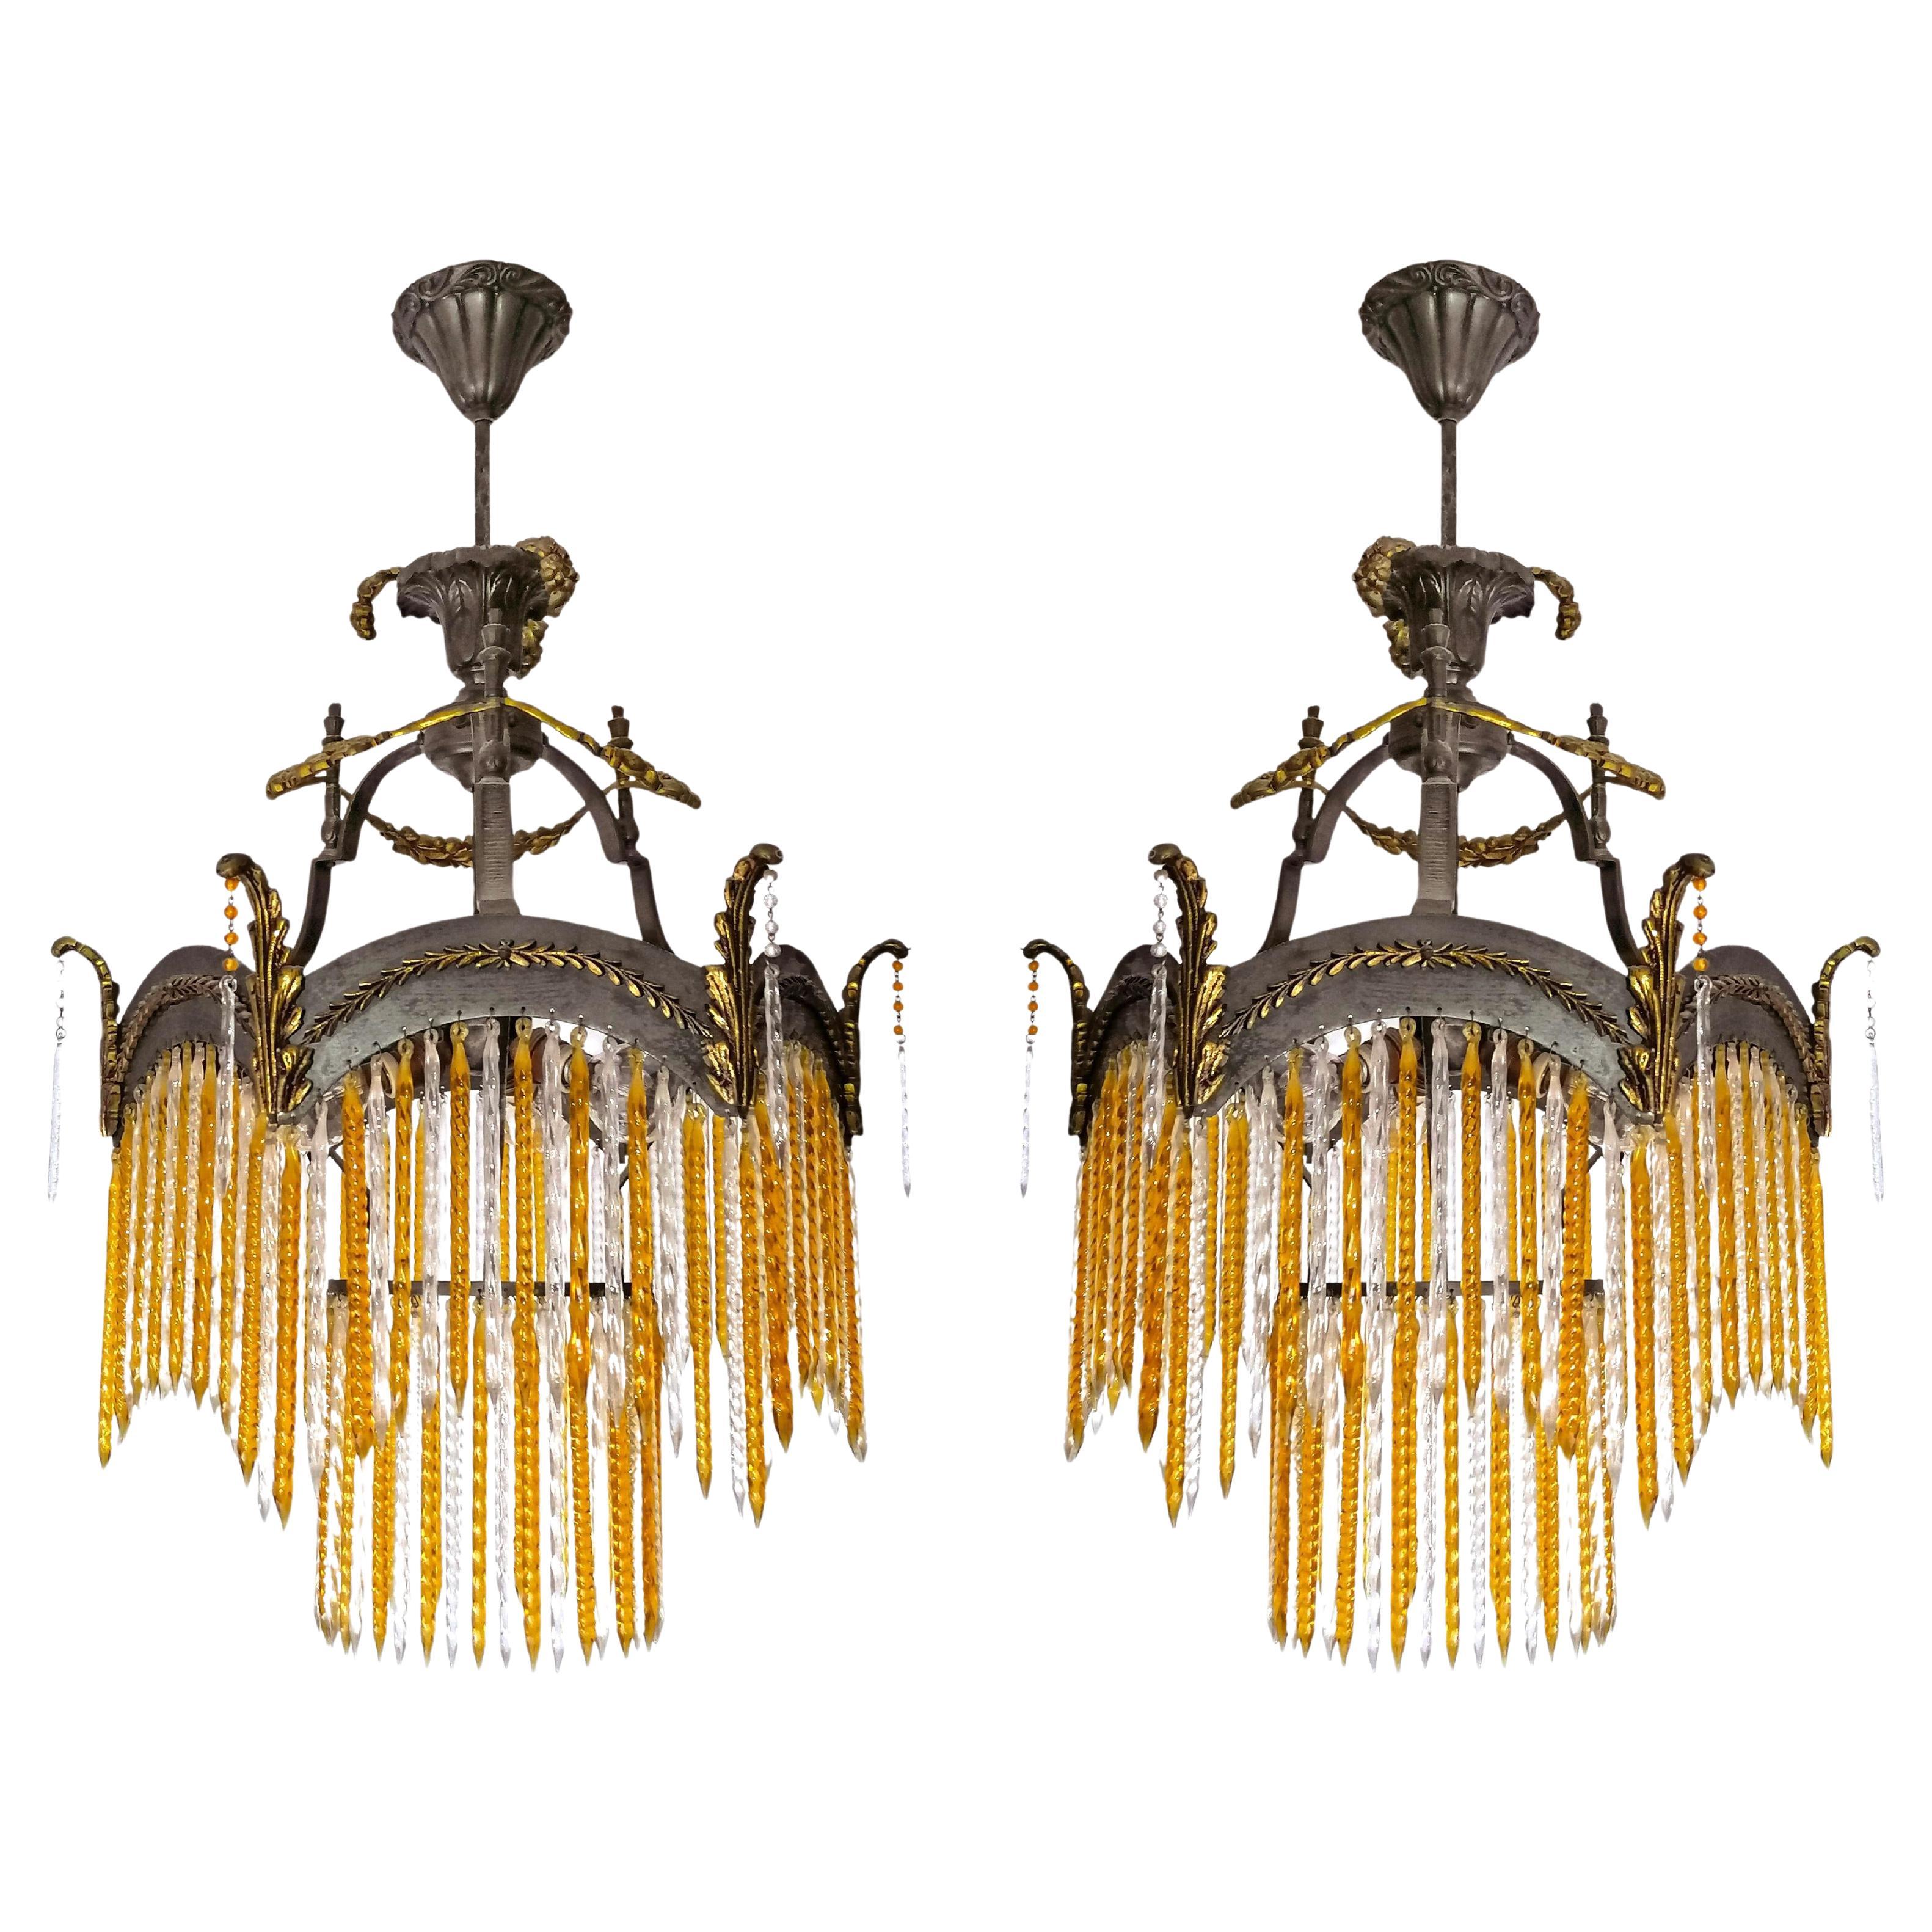 Fabulous  Art Deco or Art Nouveau amber and clear twisted crystal glass fringe and gilt bronze chandelier. Price per unit.
Dimentions:
Diameter 17.72 in/ 45 cm
Height 25.56 in/ 70 cm
Three light bulbs E14/ Good working condition
Assembly required. 